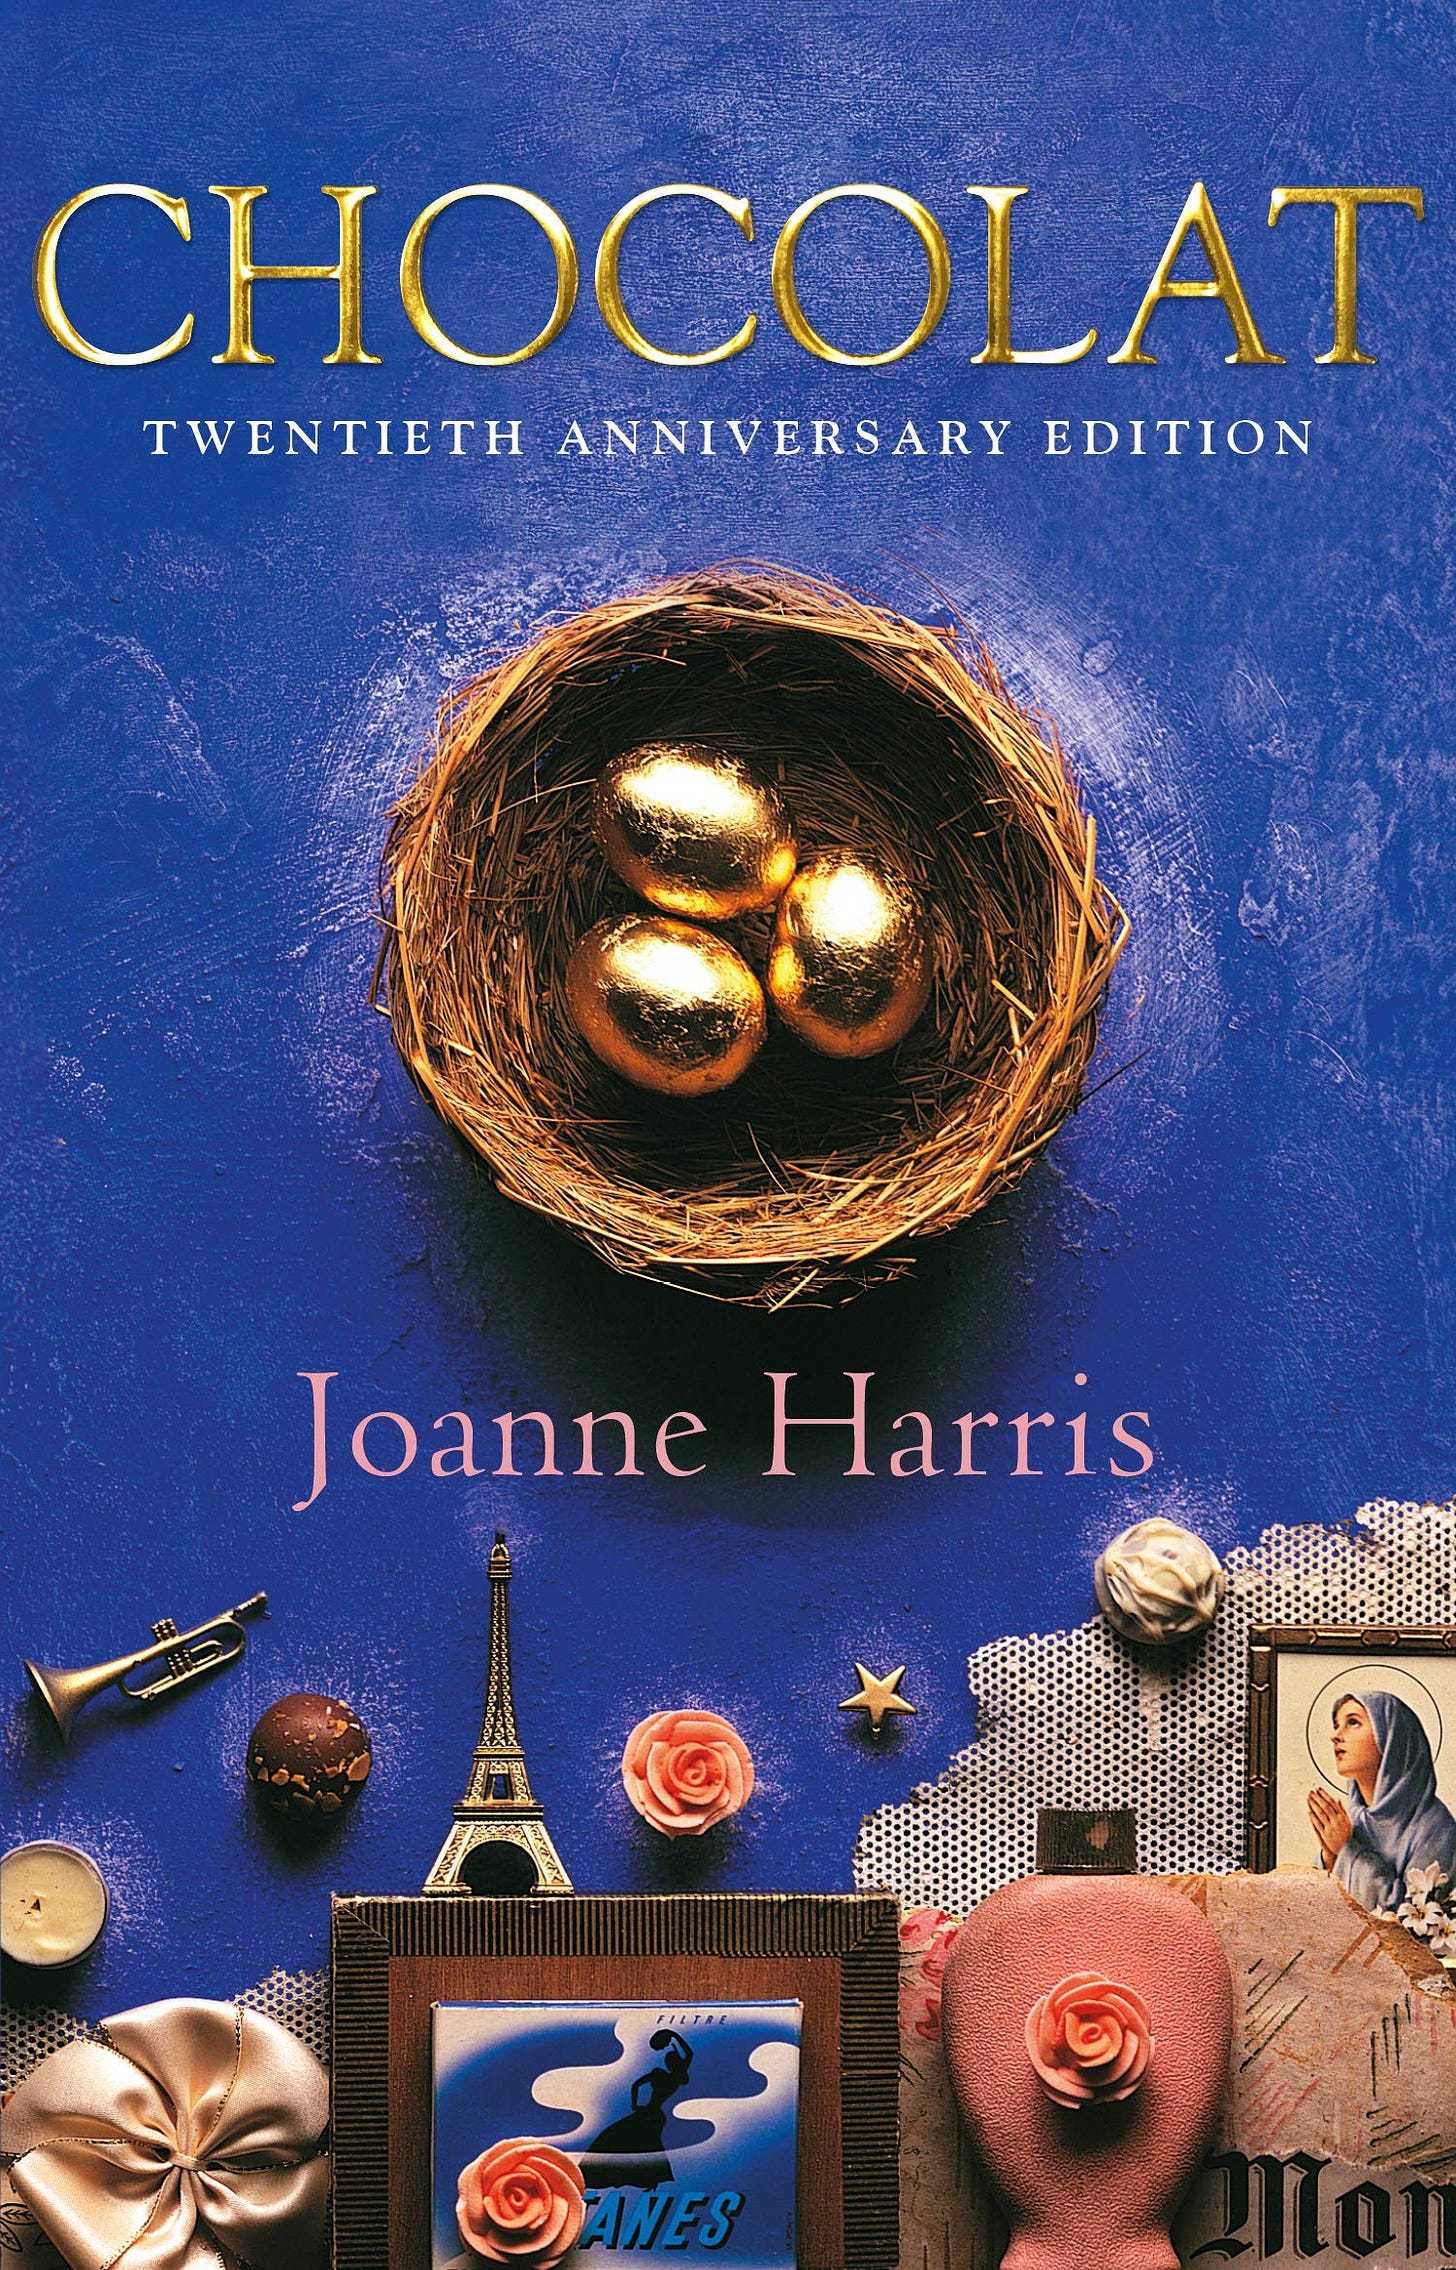 Book cover of Chocolat by Joanne Harris